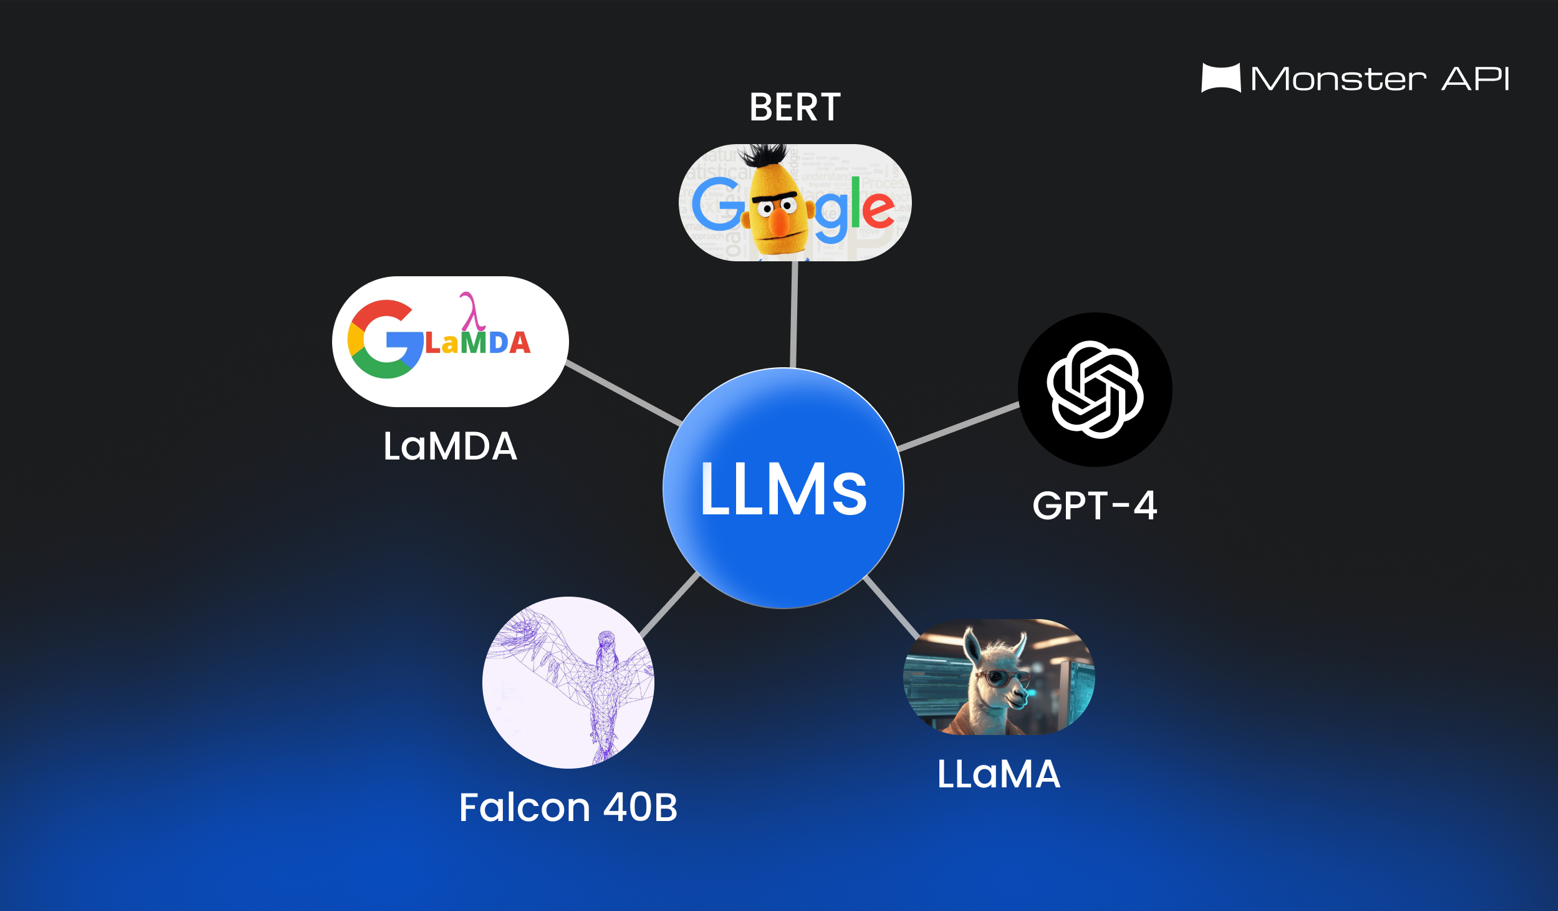 Introduction to LLMs - What Are LLMs, How Do LLMs Work?